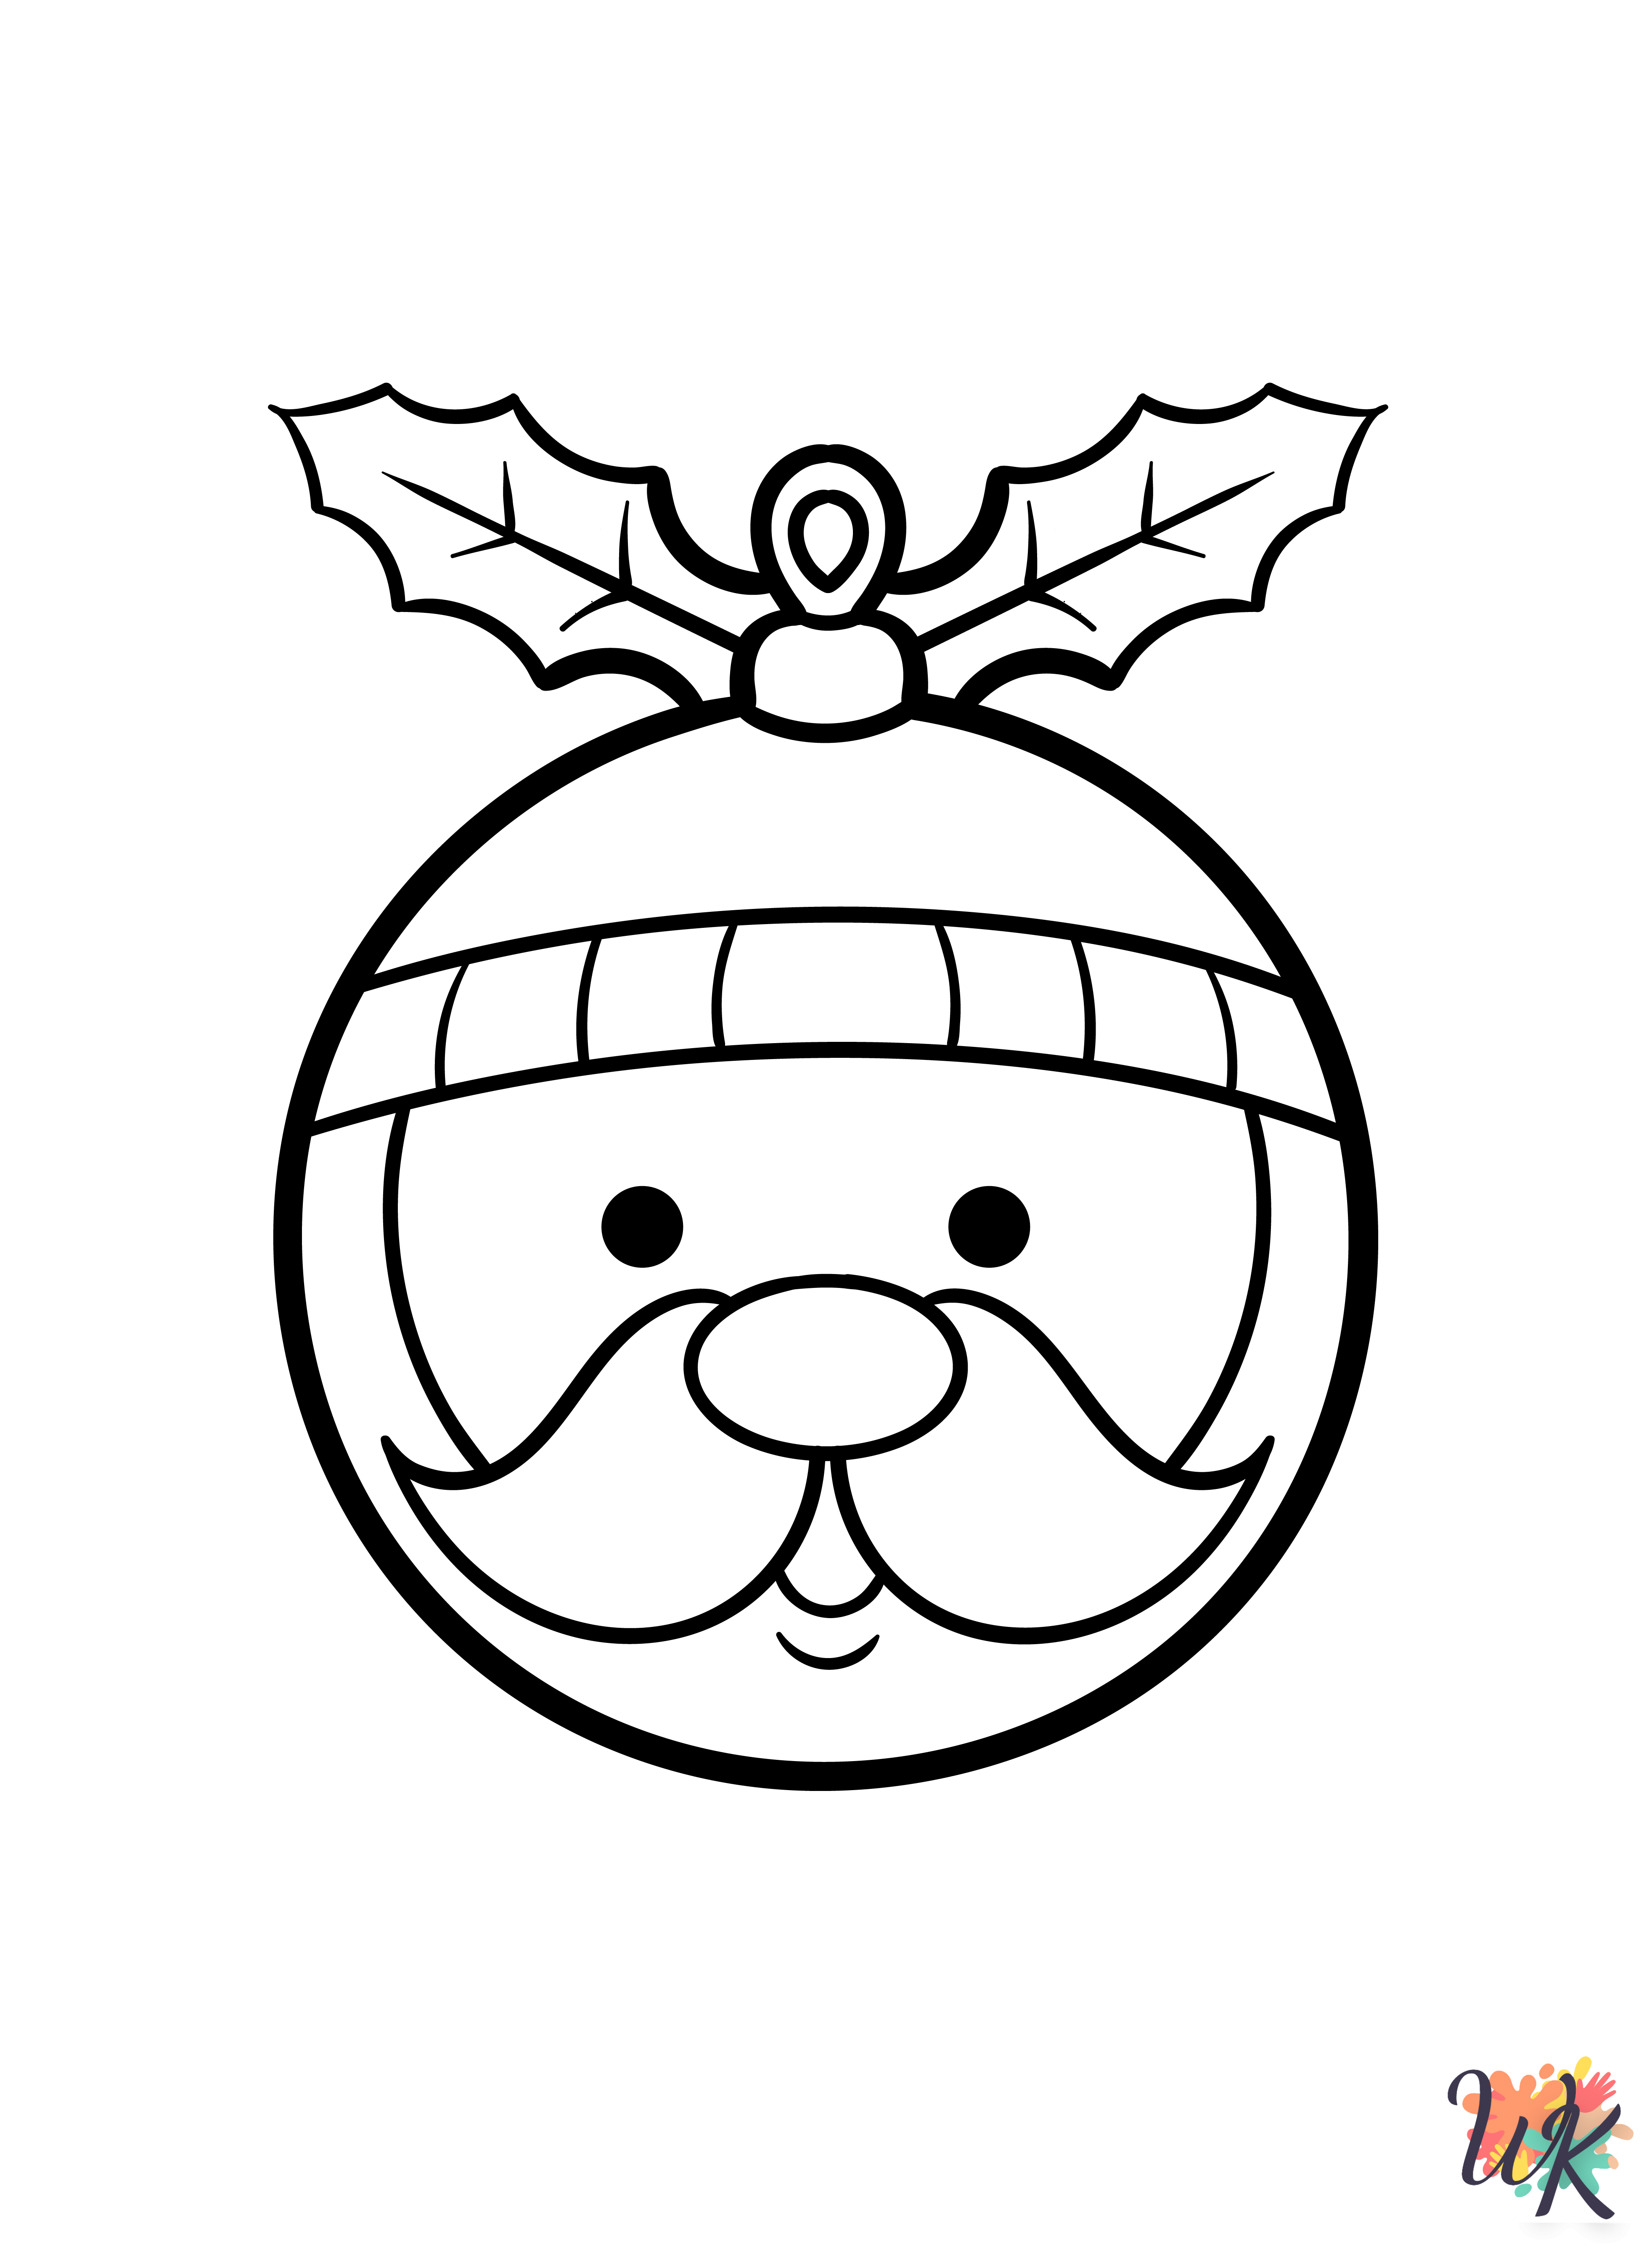 Christmas Ornament printable coloring pages 2